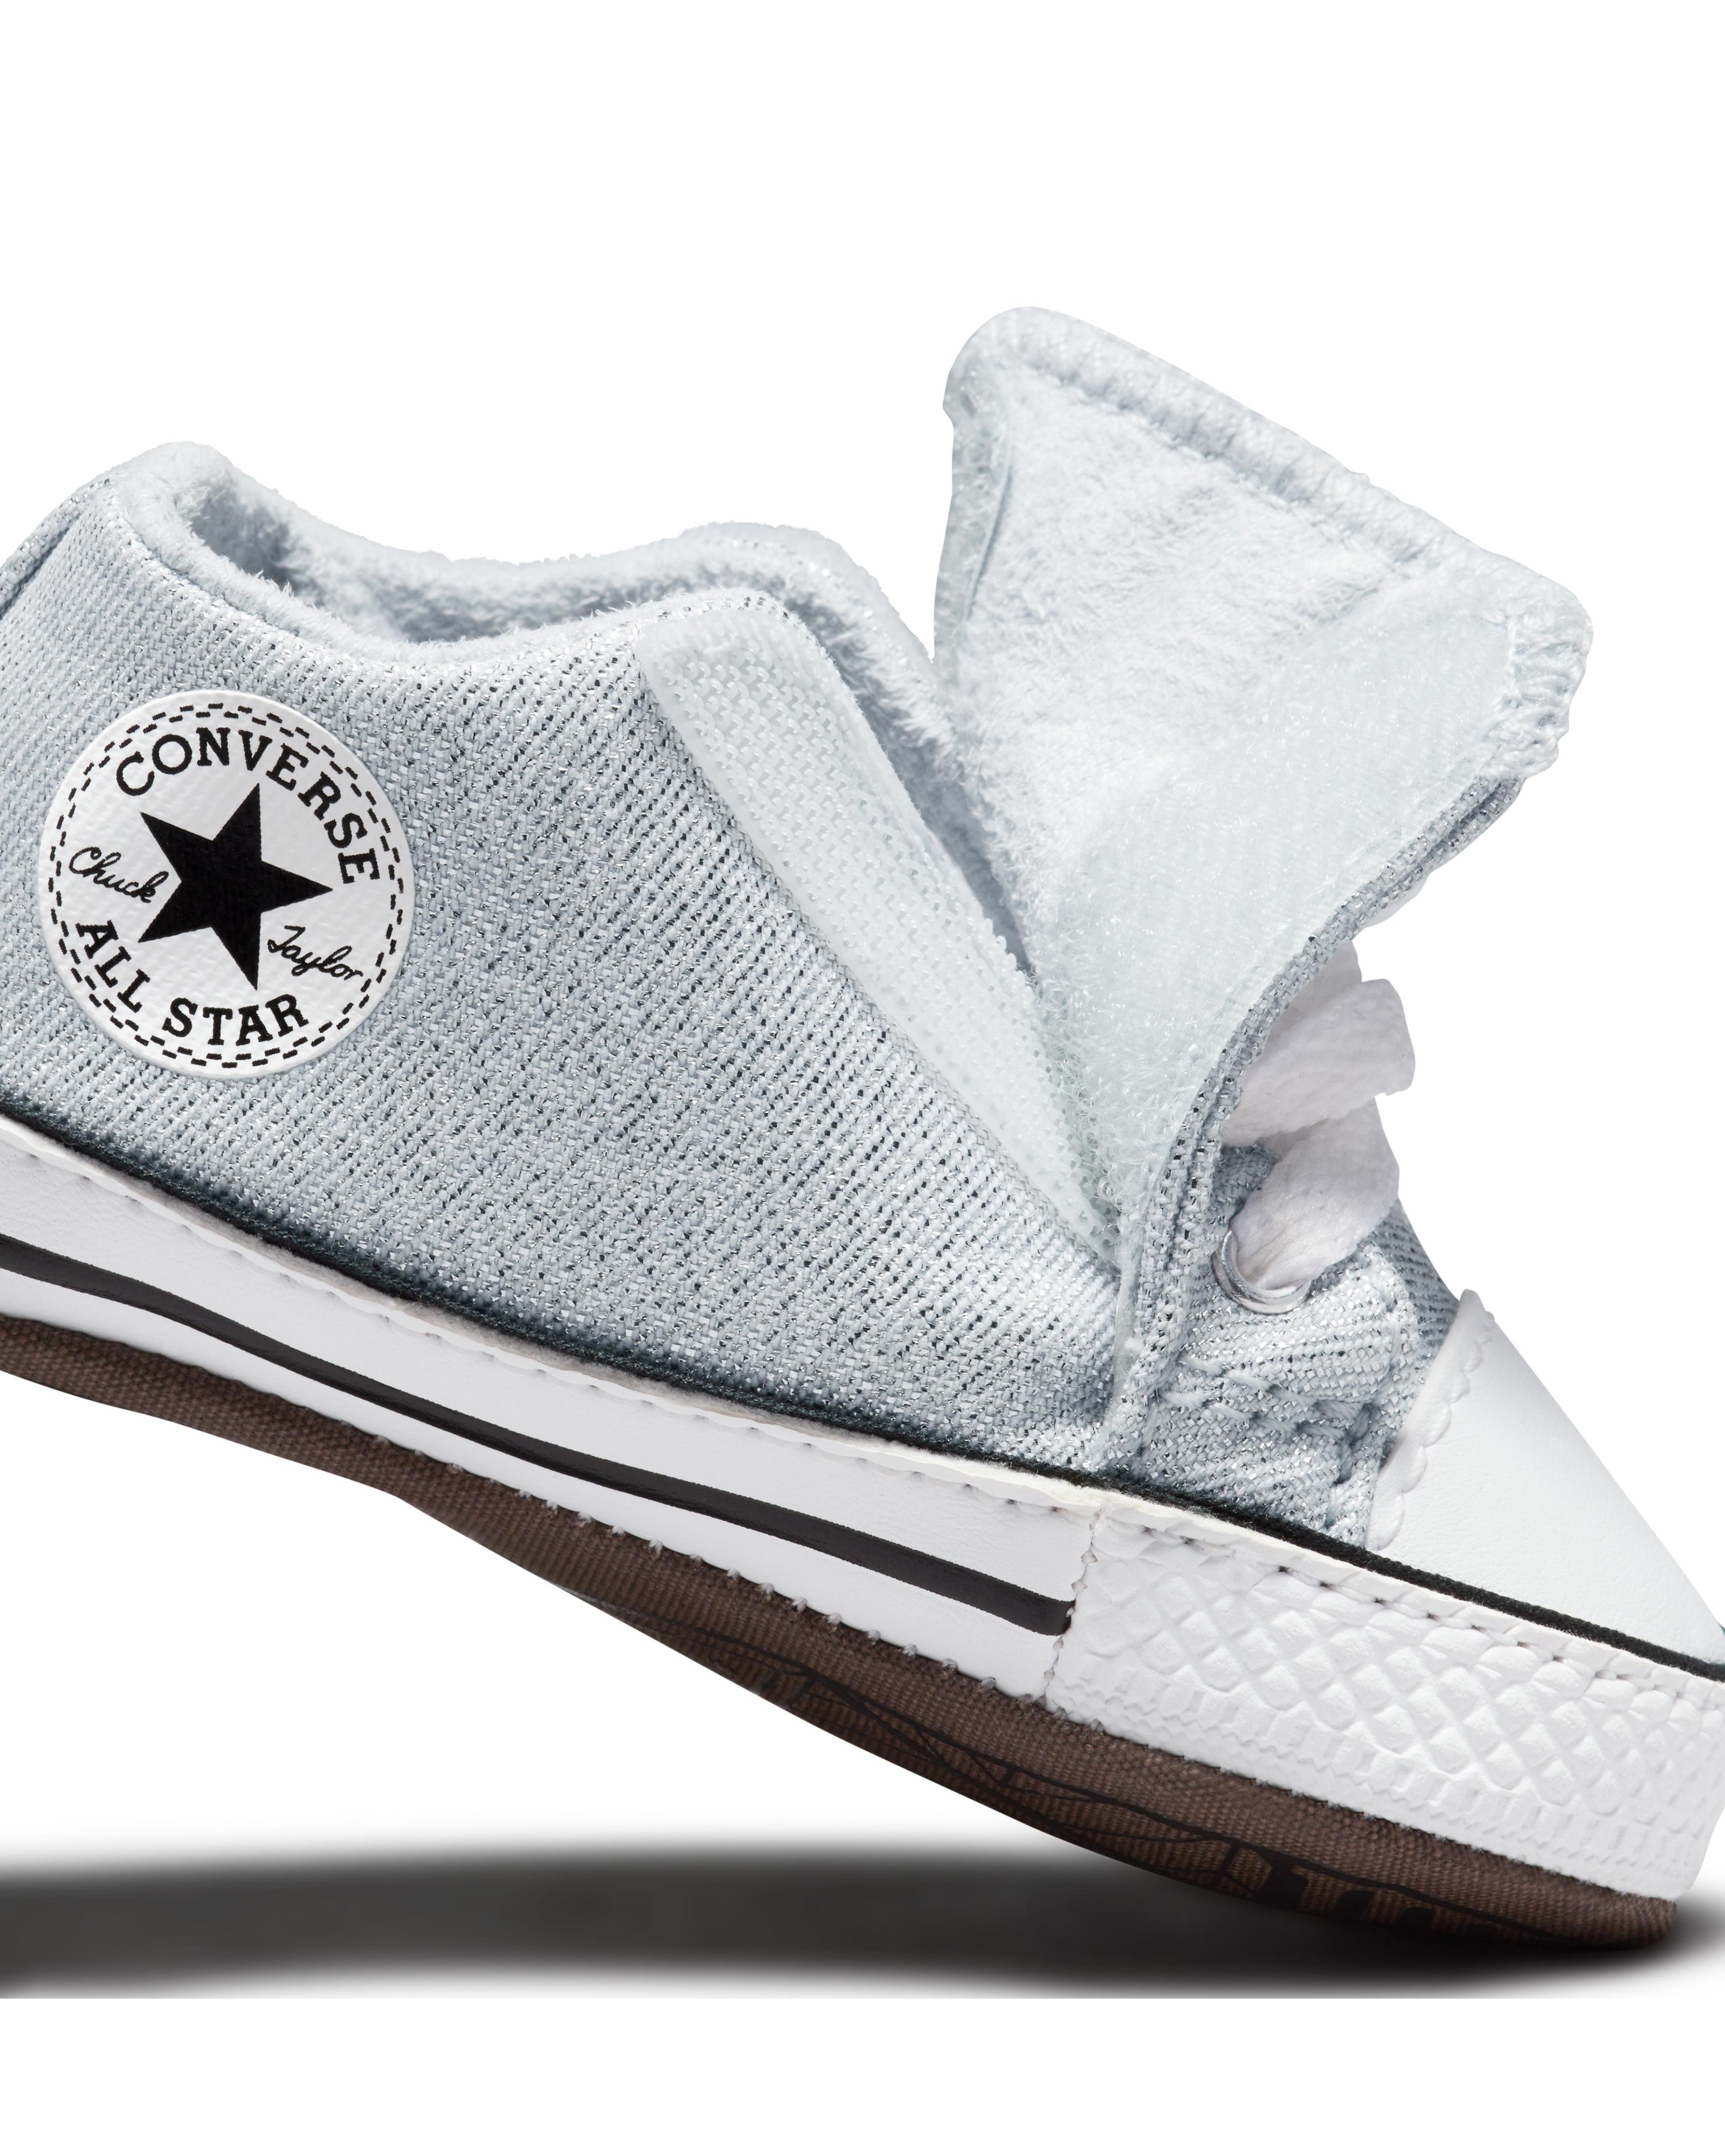 Converse Chuck Taylor Canvas Cribster Infants - Ghosted/Natural Ivory/White